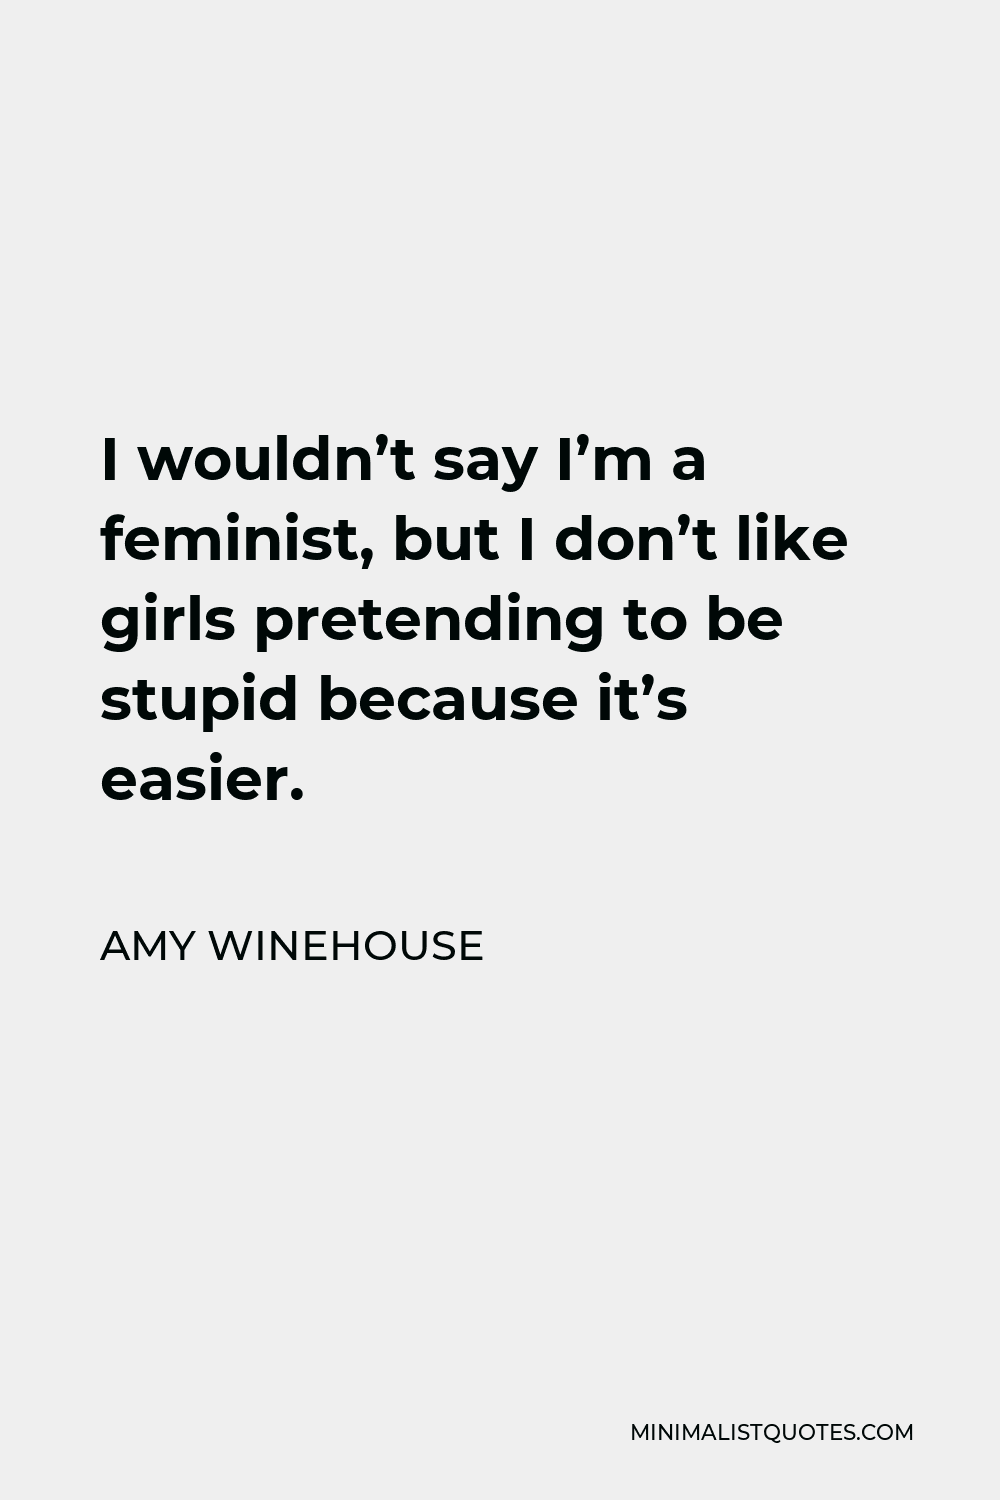 Amy Winehouse Quote - I wouldn’t say I’m a feminist, but I don’t like girls pretending to be stupid because it’s easier.